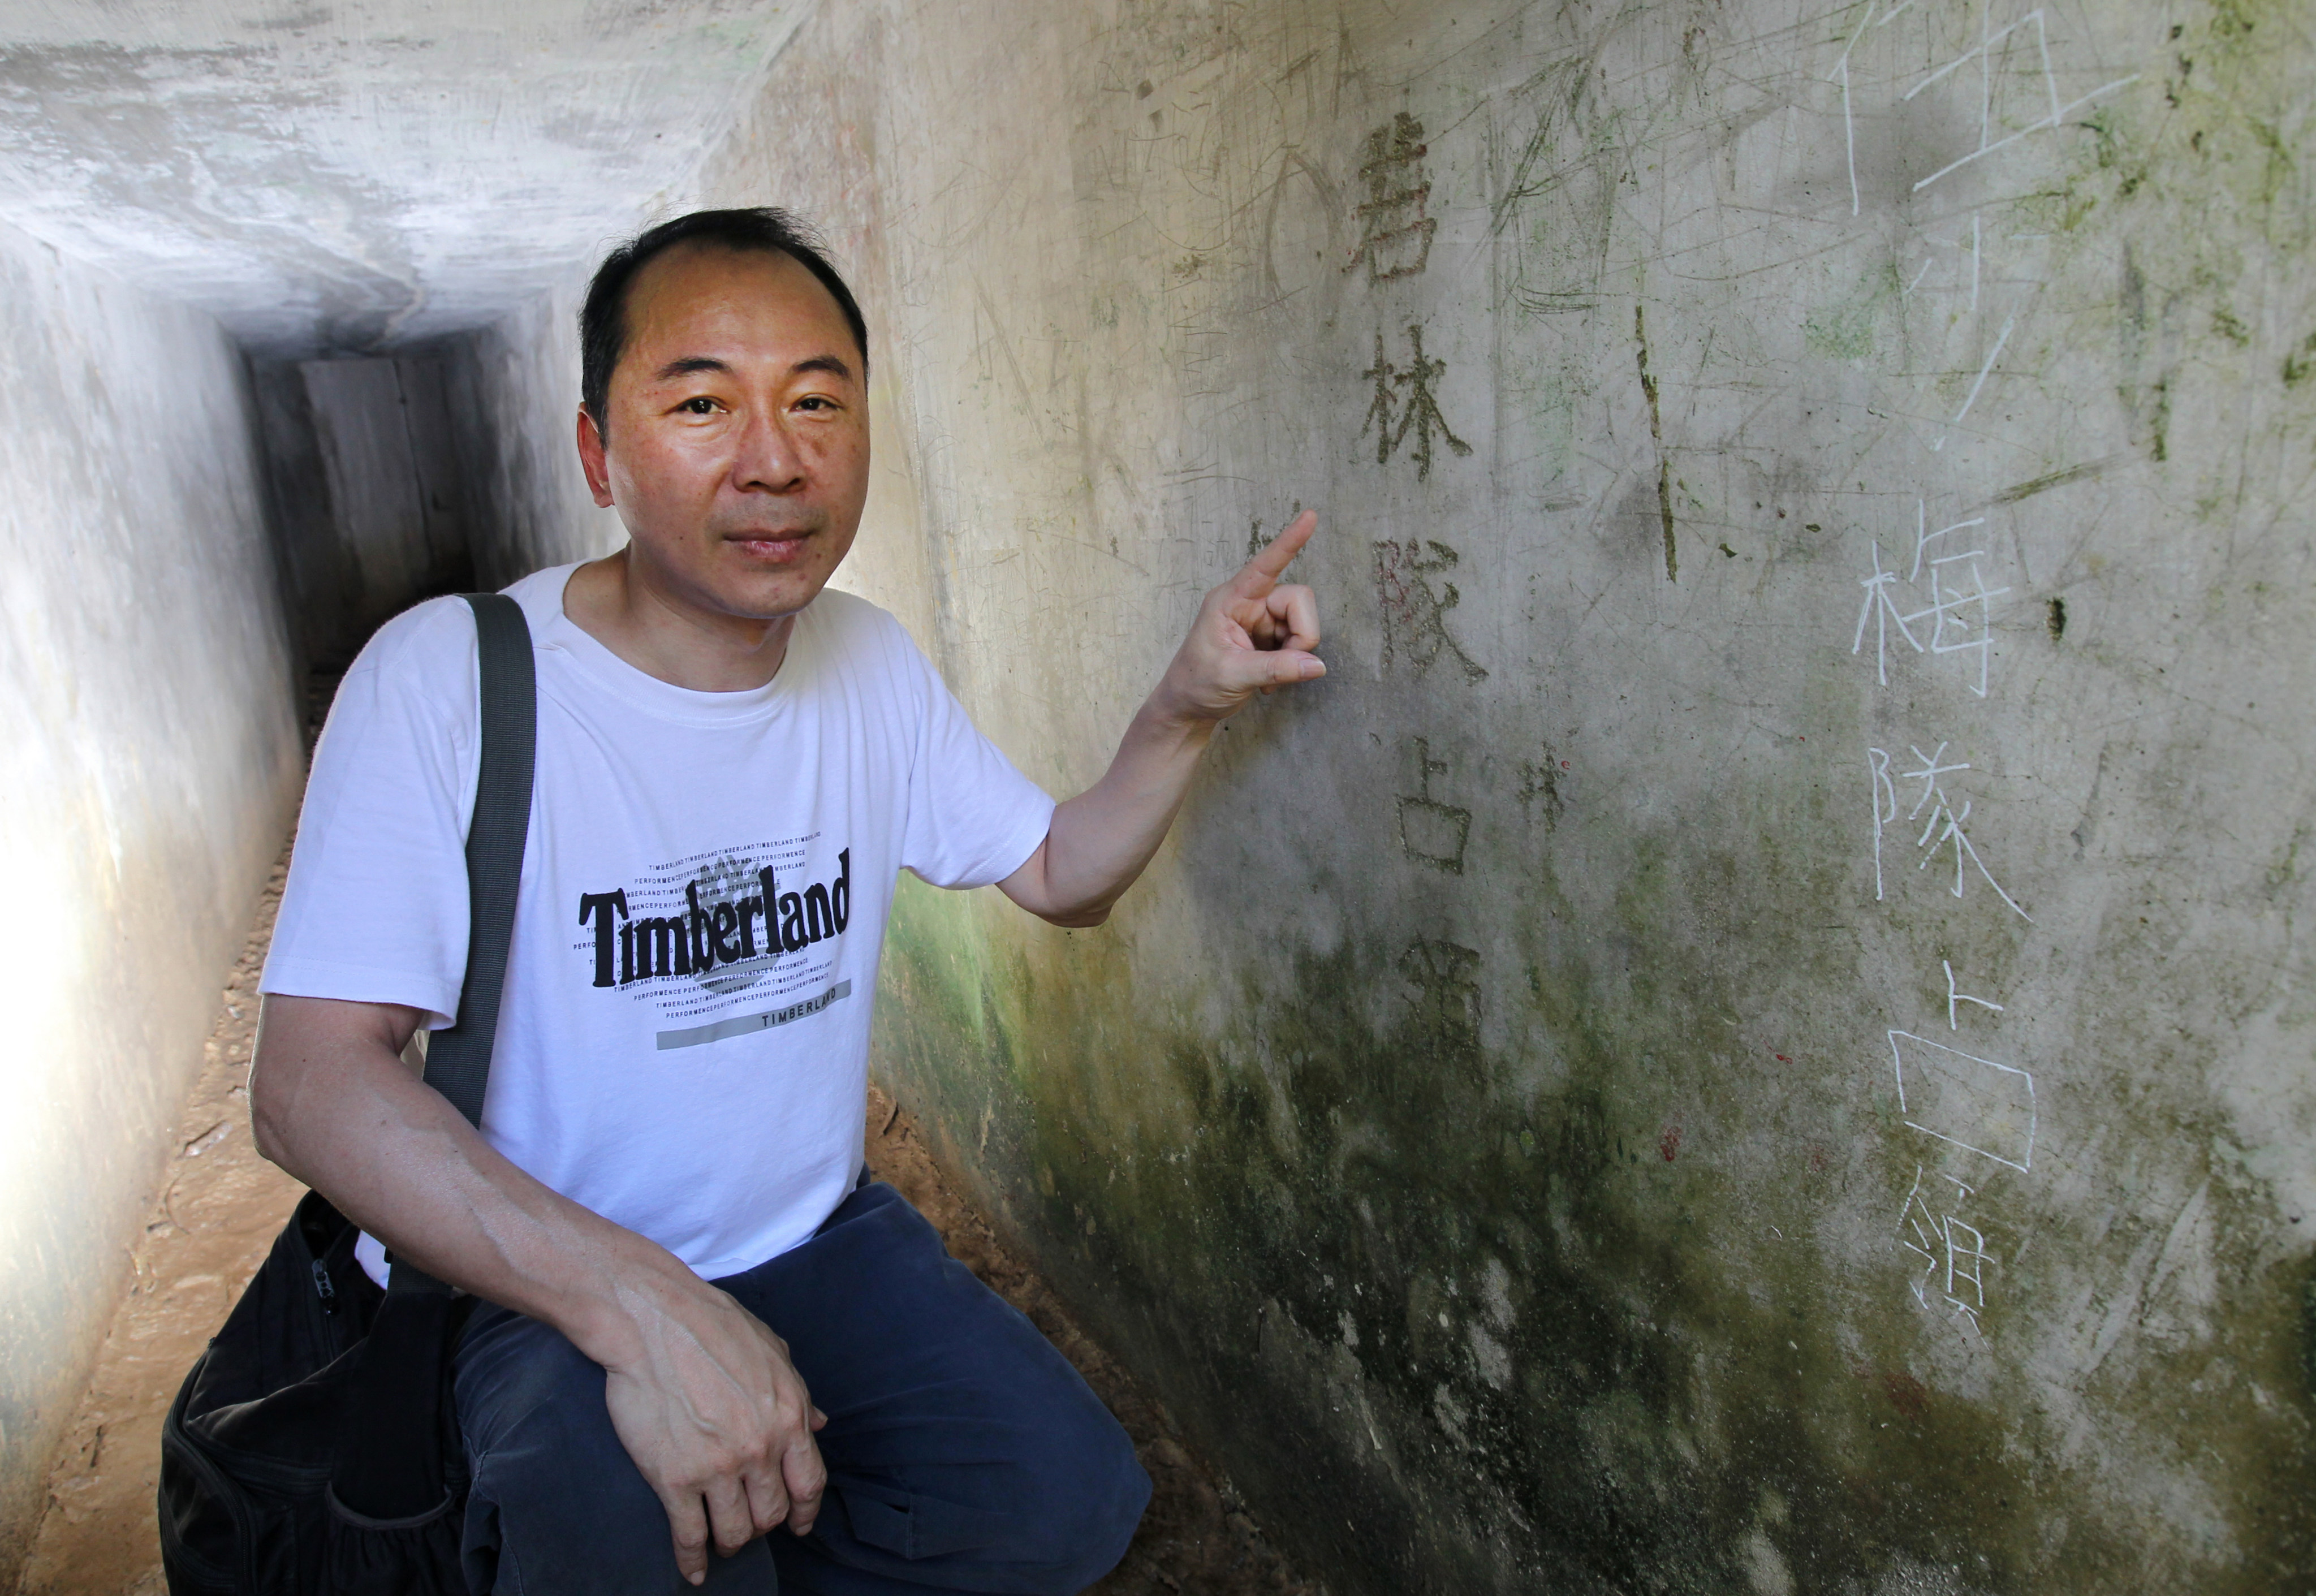 Ko Tim-keung, an expert in Hong Kong military history, shows a rare inscription left by the Japanese army in a tunnel of the Shing Mun Redoubt during the second world war. The inscriptions mark the name of a Japanese commander Wakabayashi Toichi, considered by Japanese as a war hero. But it is threatened by vandalism. Photo: Dickson Lee